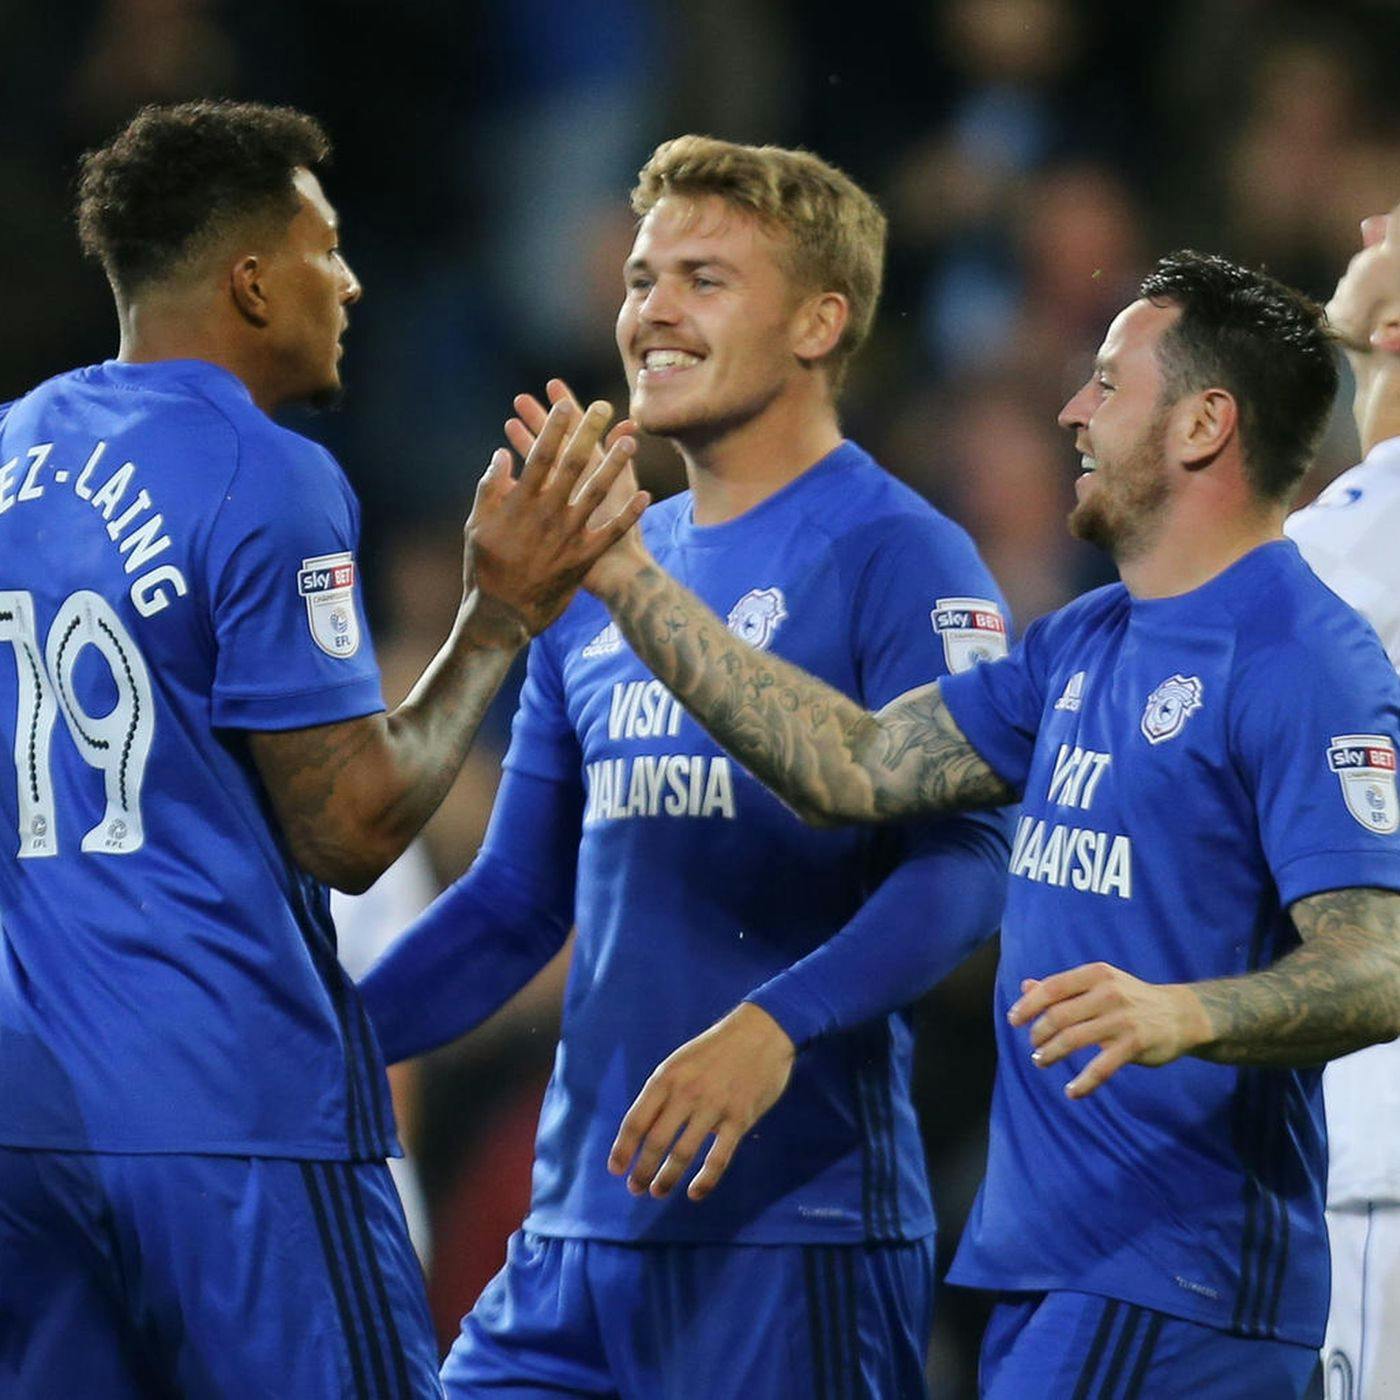 Cardiff love big games and Tomlin's wait goes on